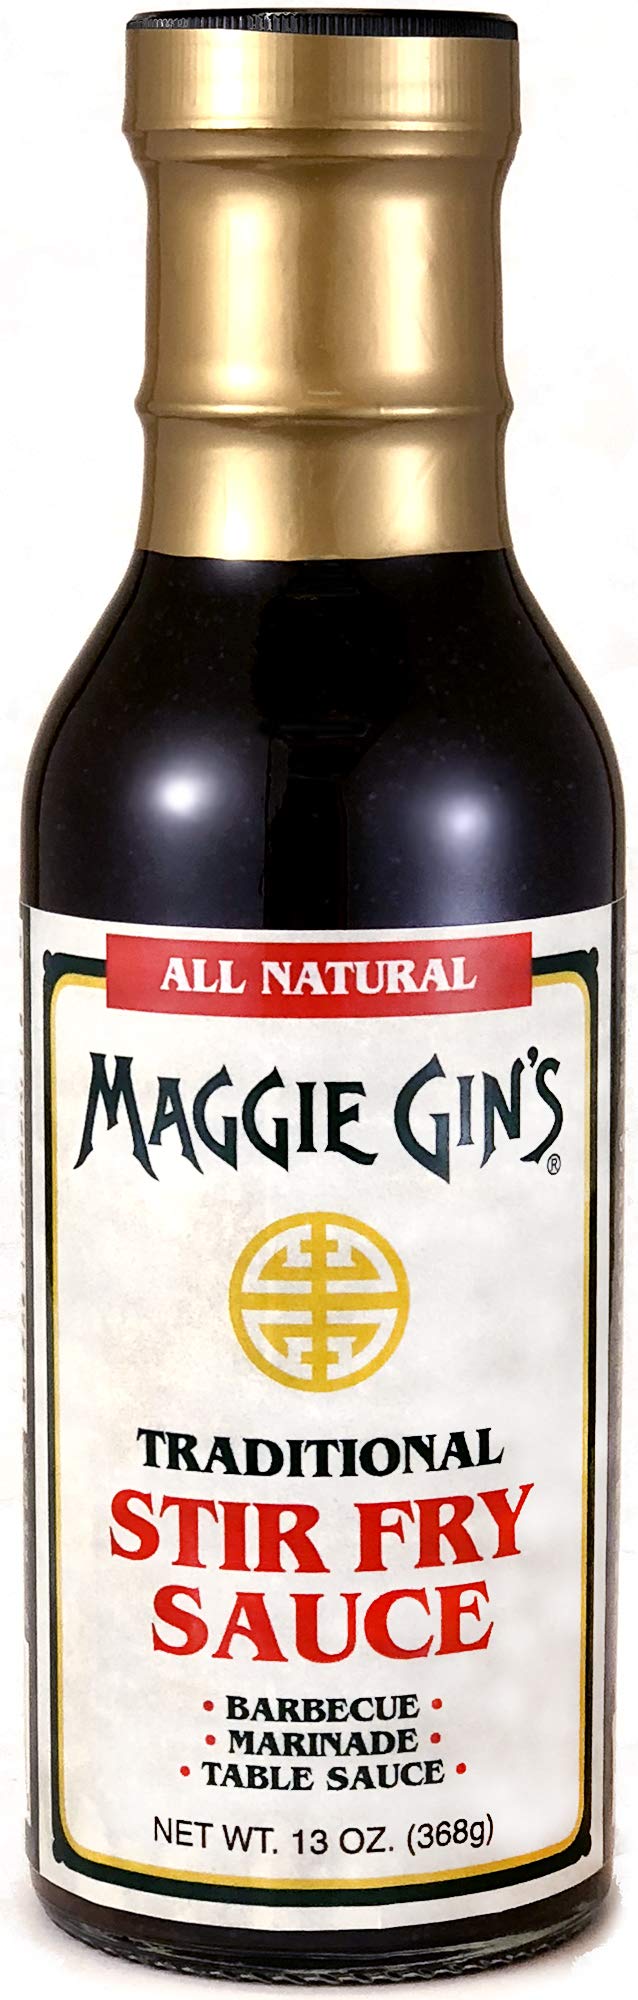 Maggie Gin's Traditional Stir Fry Sauce